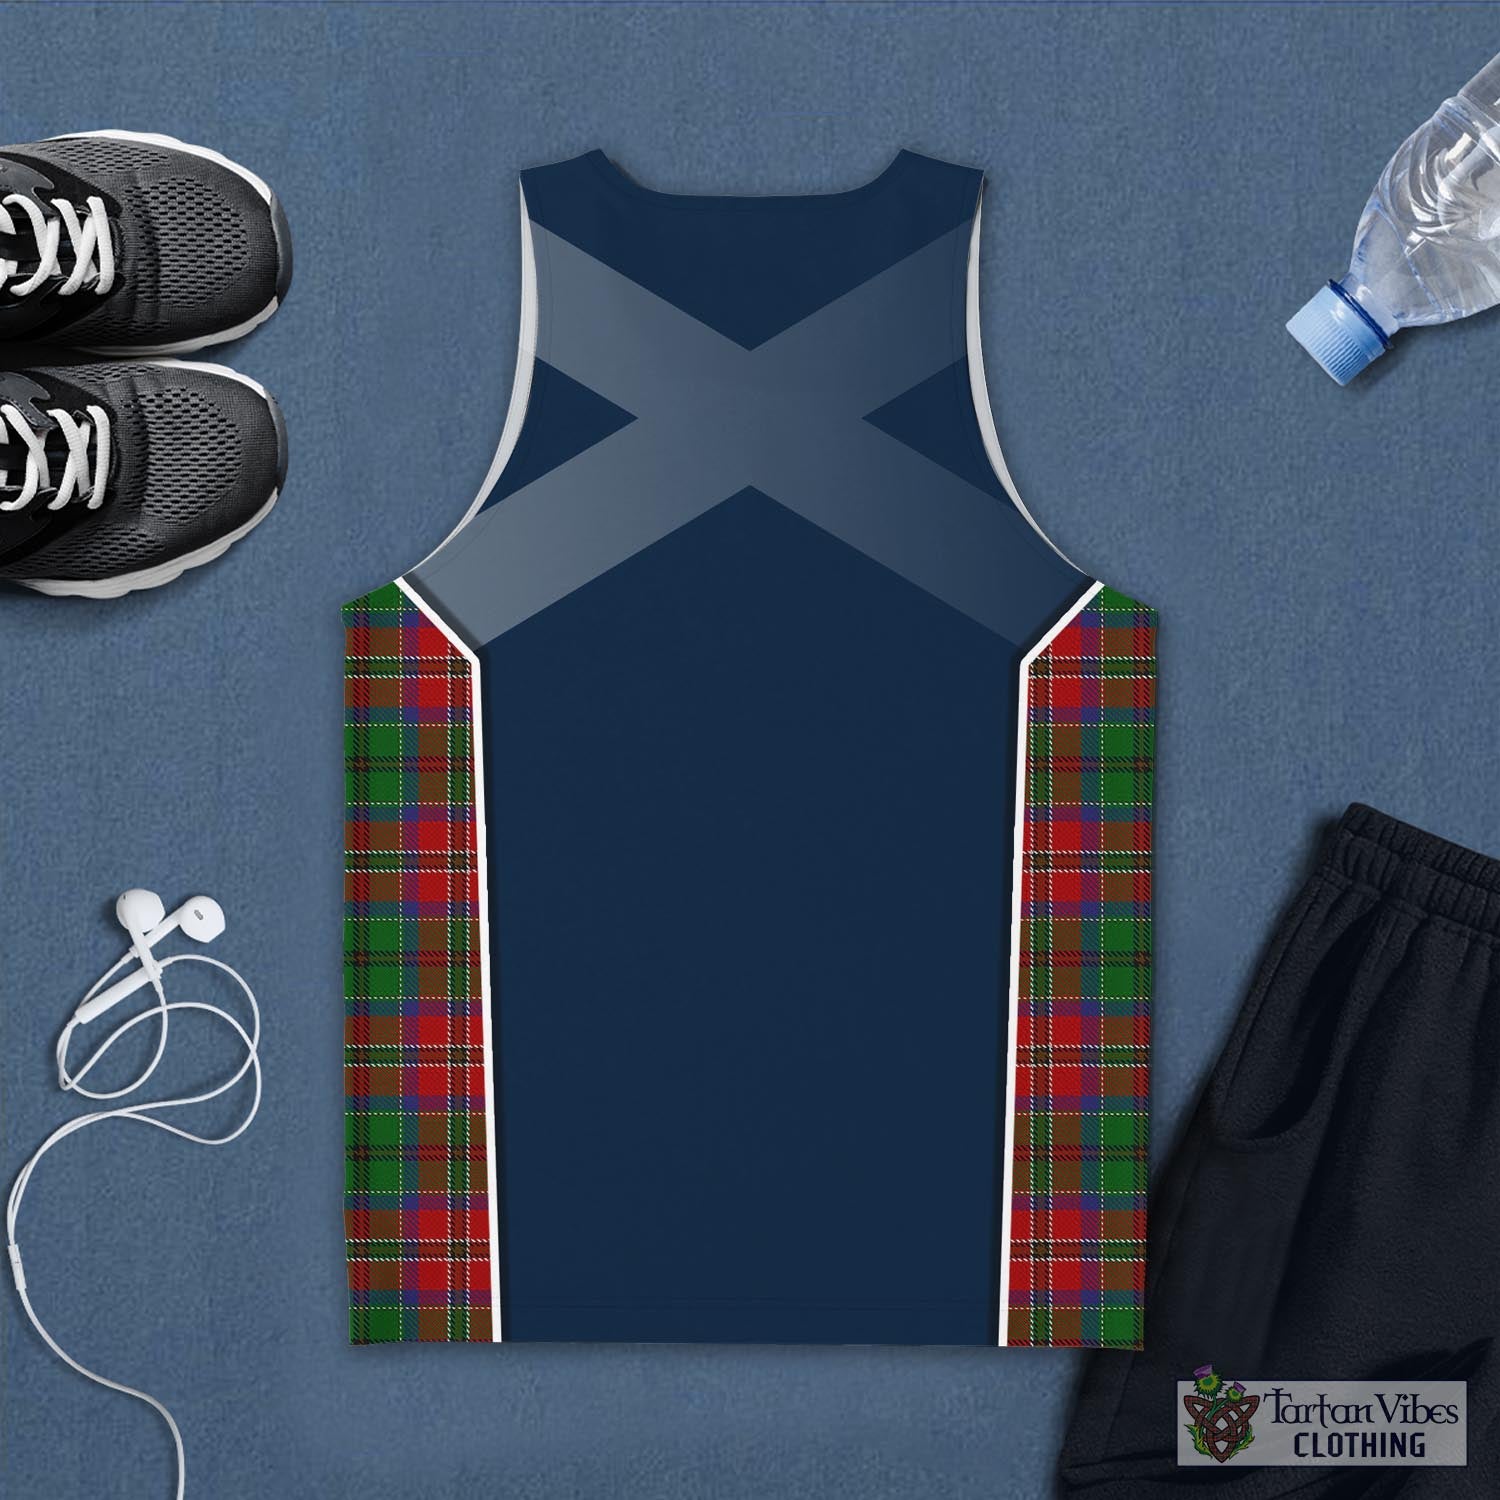 Tartan Vibes Clothing MacCulloch Tartan Men's Tanks Top with Family Crest and Scottish Thistle Vibes Sport Style